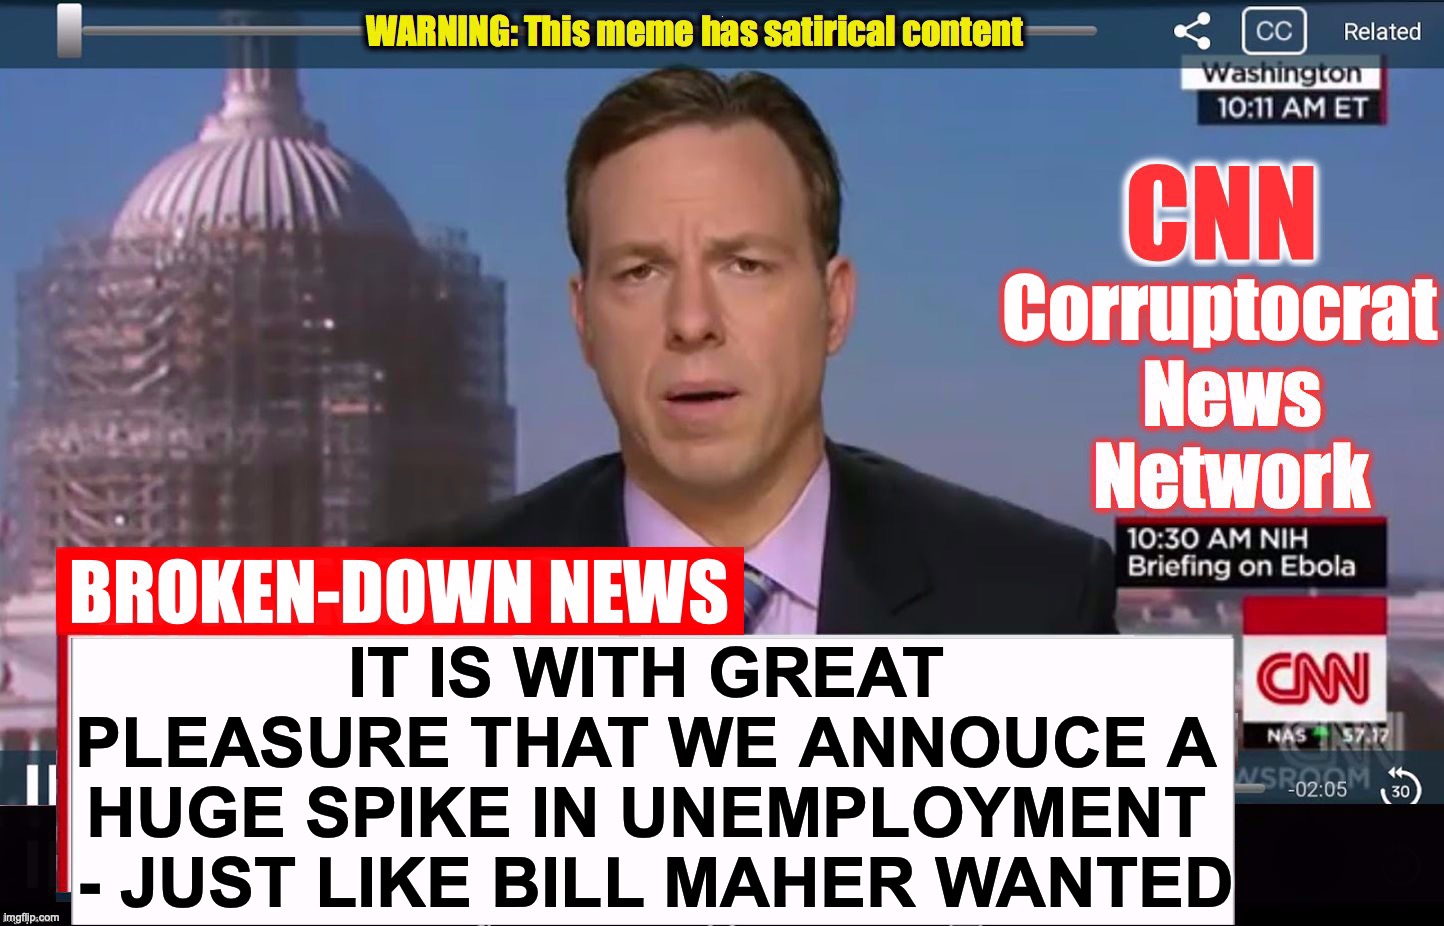 CNN Corruptocrat News Network | IT IS WITH GREAT PLEASURE THAT WE ANNOUCE A HUGE SPIKE IN UNEMPLOYMENT  - JUST LIKE BILL MAHER WANTED | image tagged in cnn corruptocrat news network | made w/ Imgflip meme maker